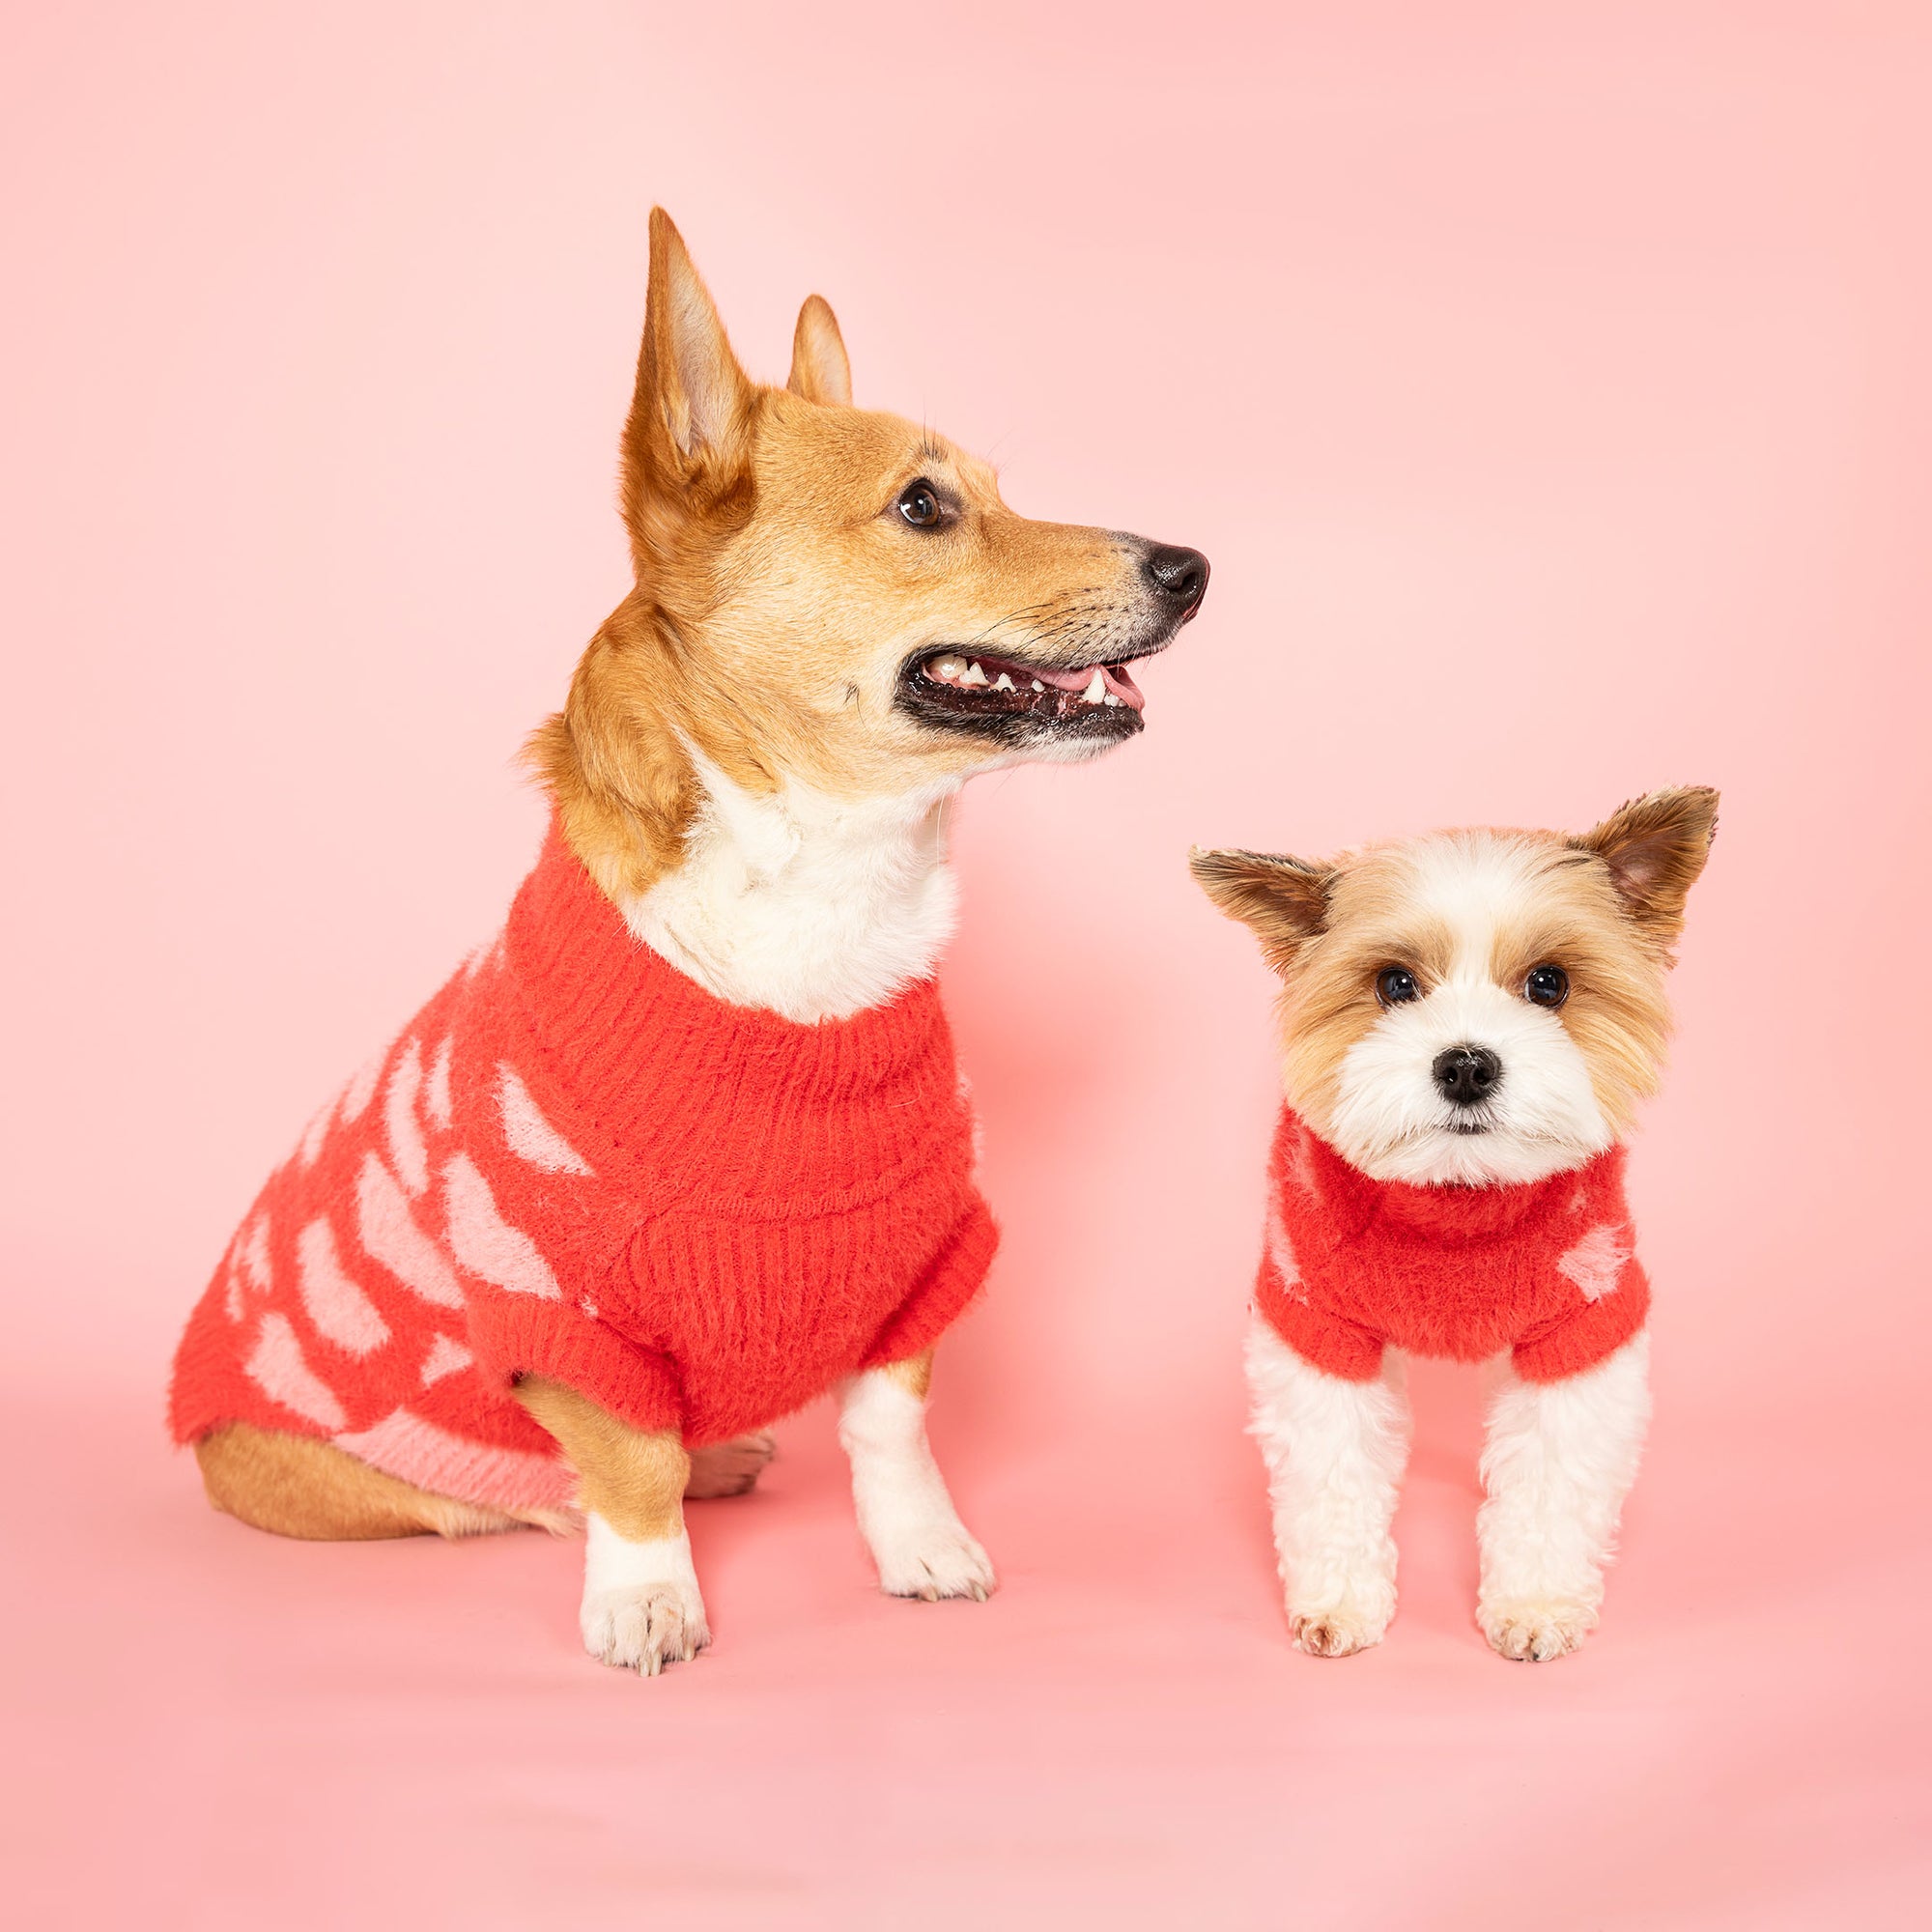 "A cheerful Corgi and a Yorkshire Terrier mix both dressed in red sweaters with pink hearts, posing together on a soft pink background.